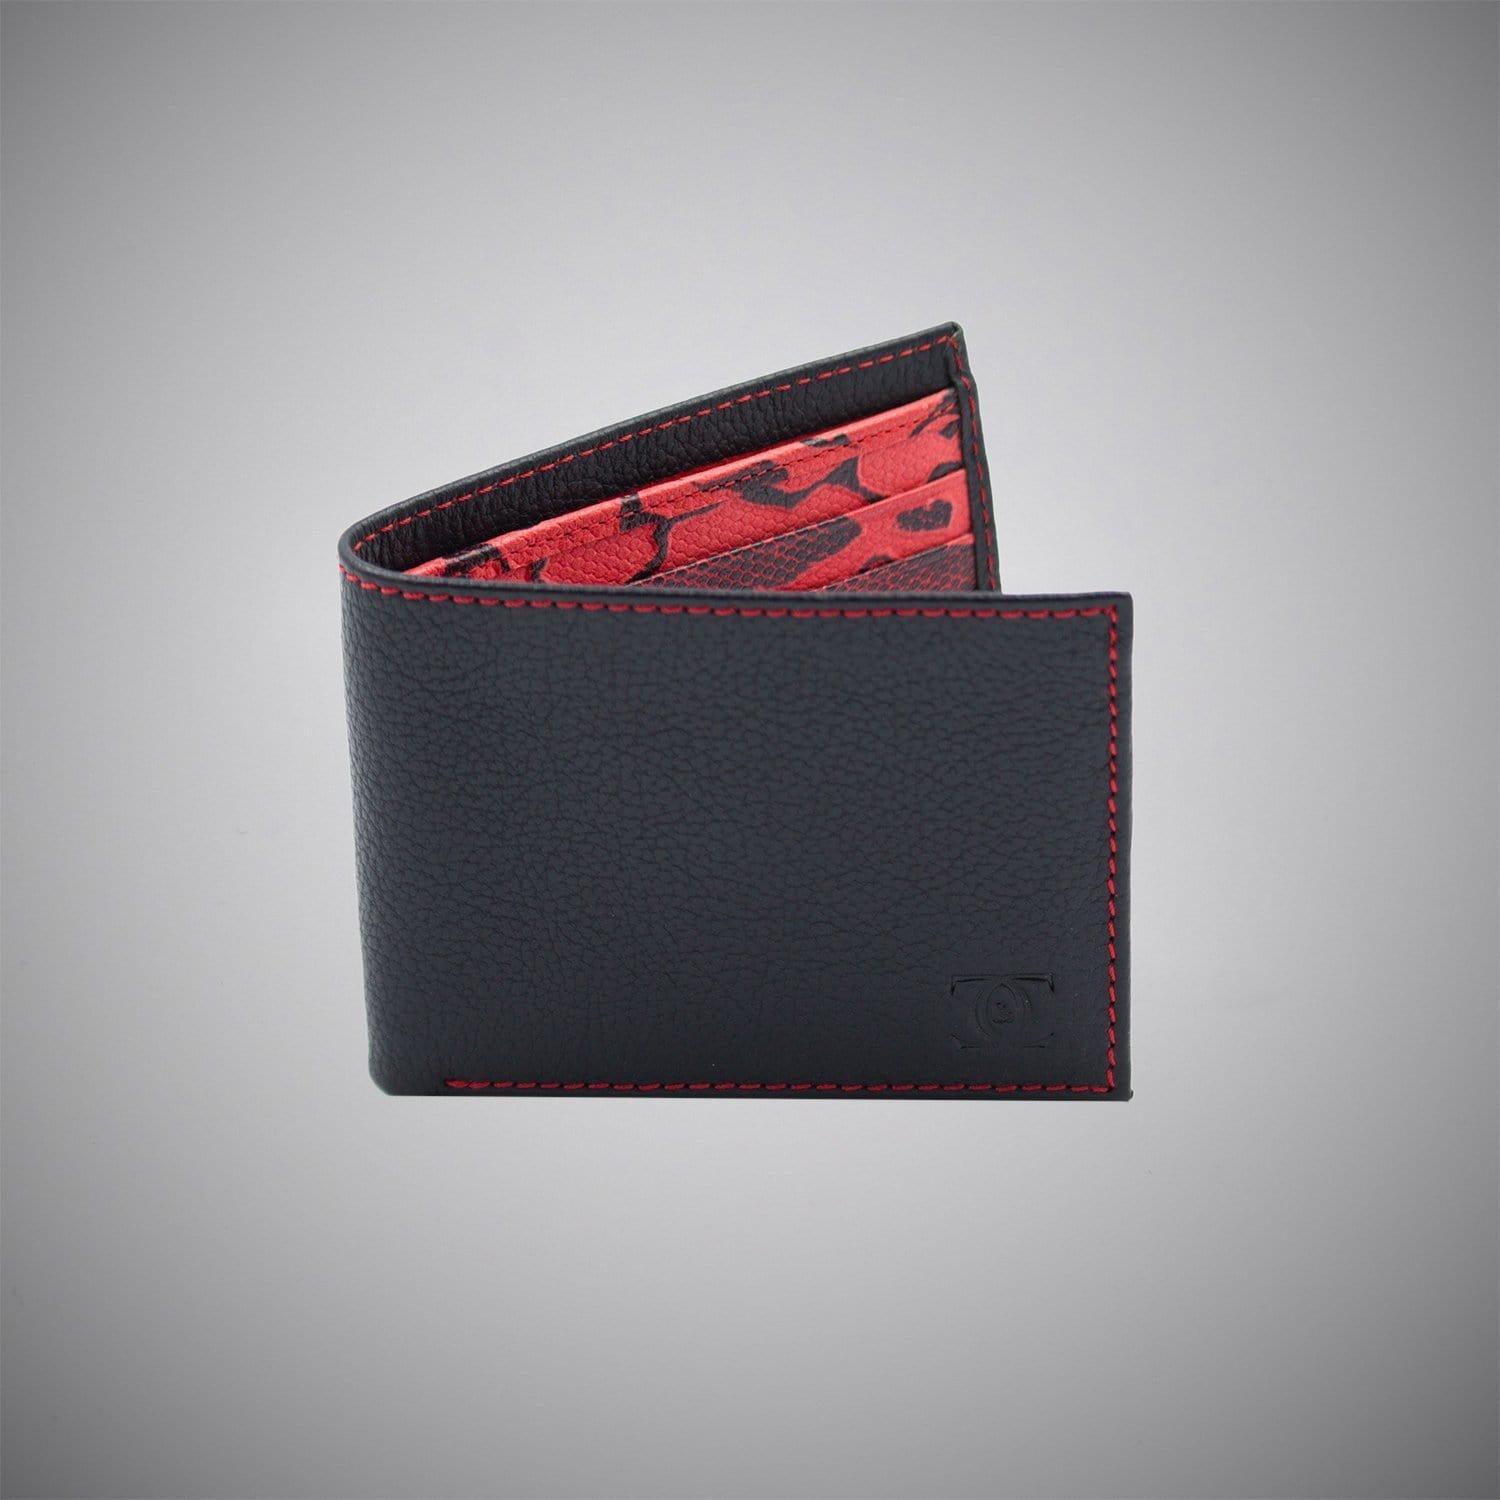 Black Embossed Calf Leather Wallet With Red Stitching And A Red And Black Embossed Leather Interior - Just White Shirts